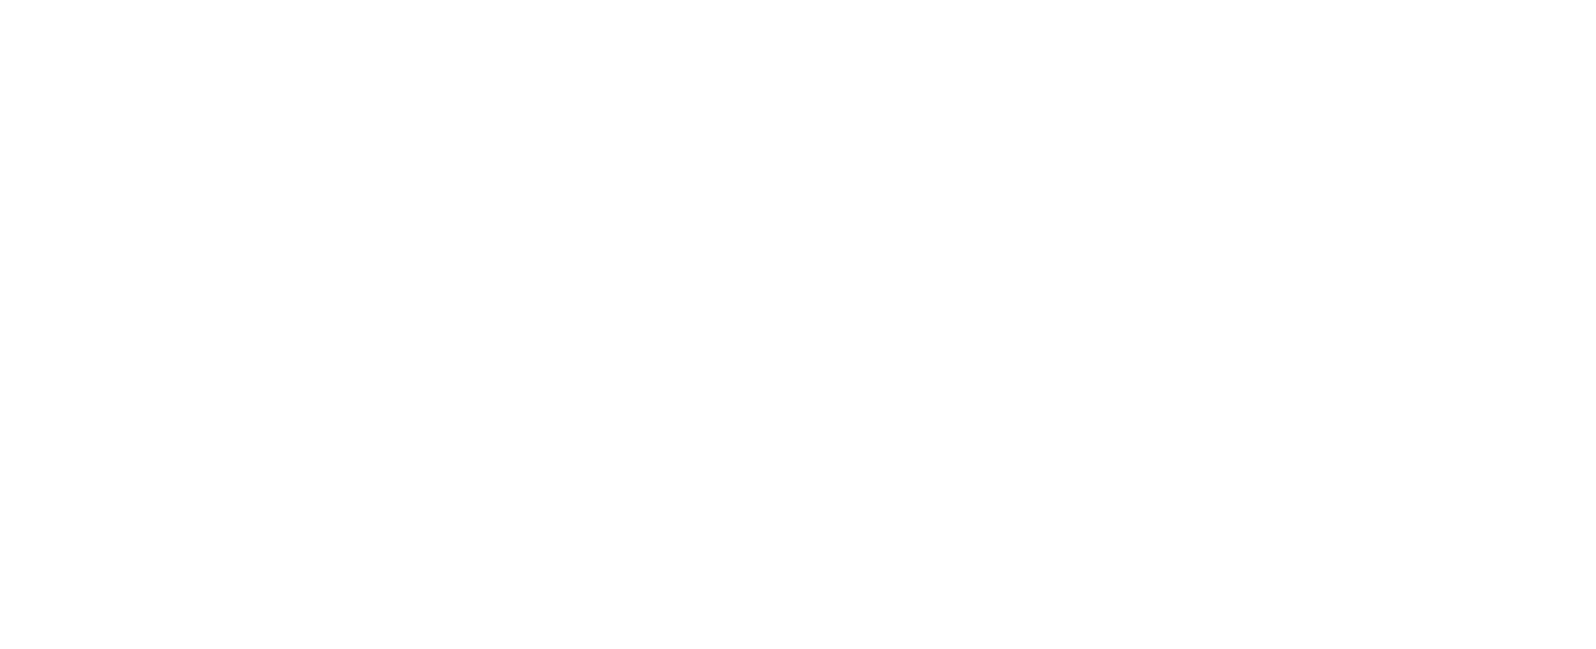 The Arena Group logo large for dark backgrounds (transparent PNG)